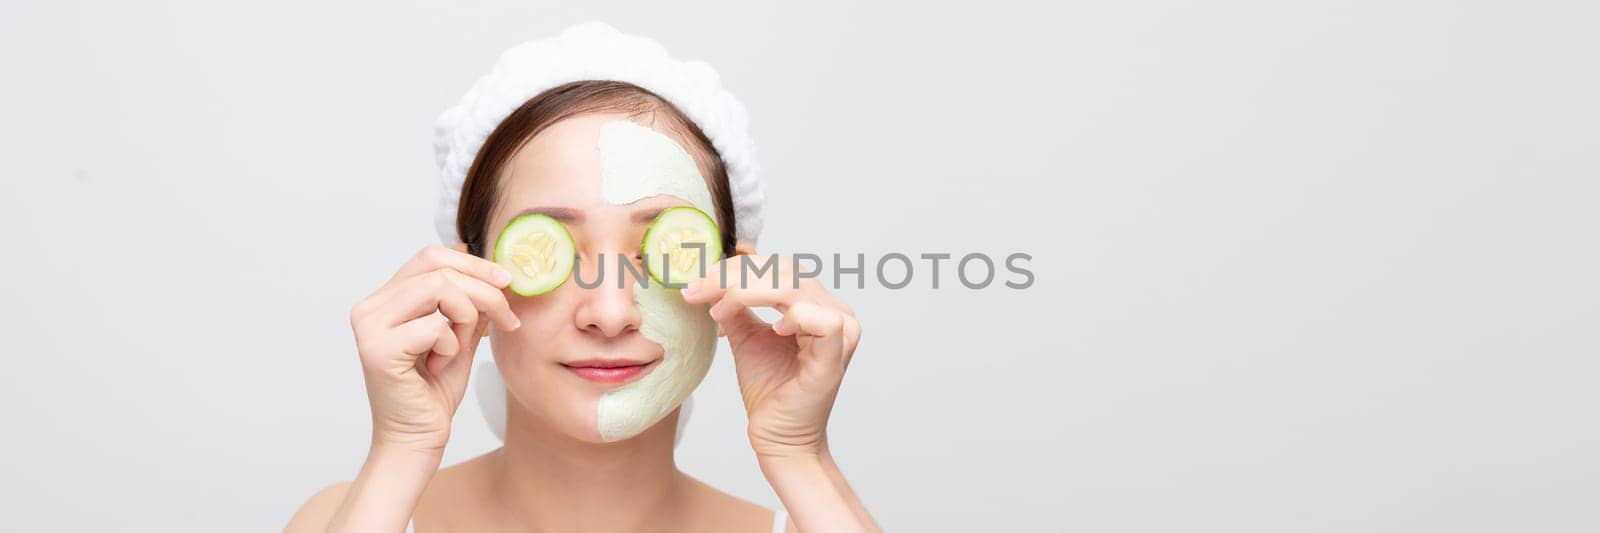 Woman with facial mask holds sliced cucumber, over white banner background by makidotvn